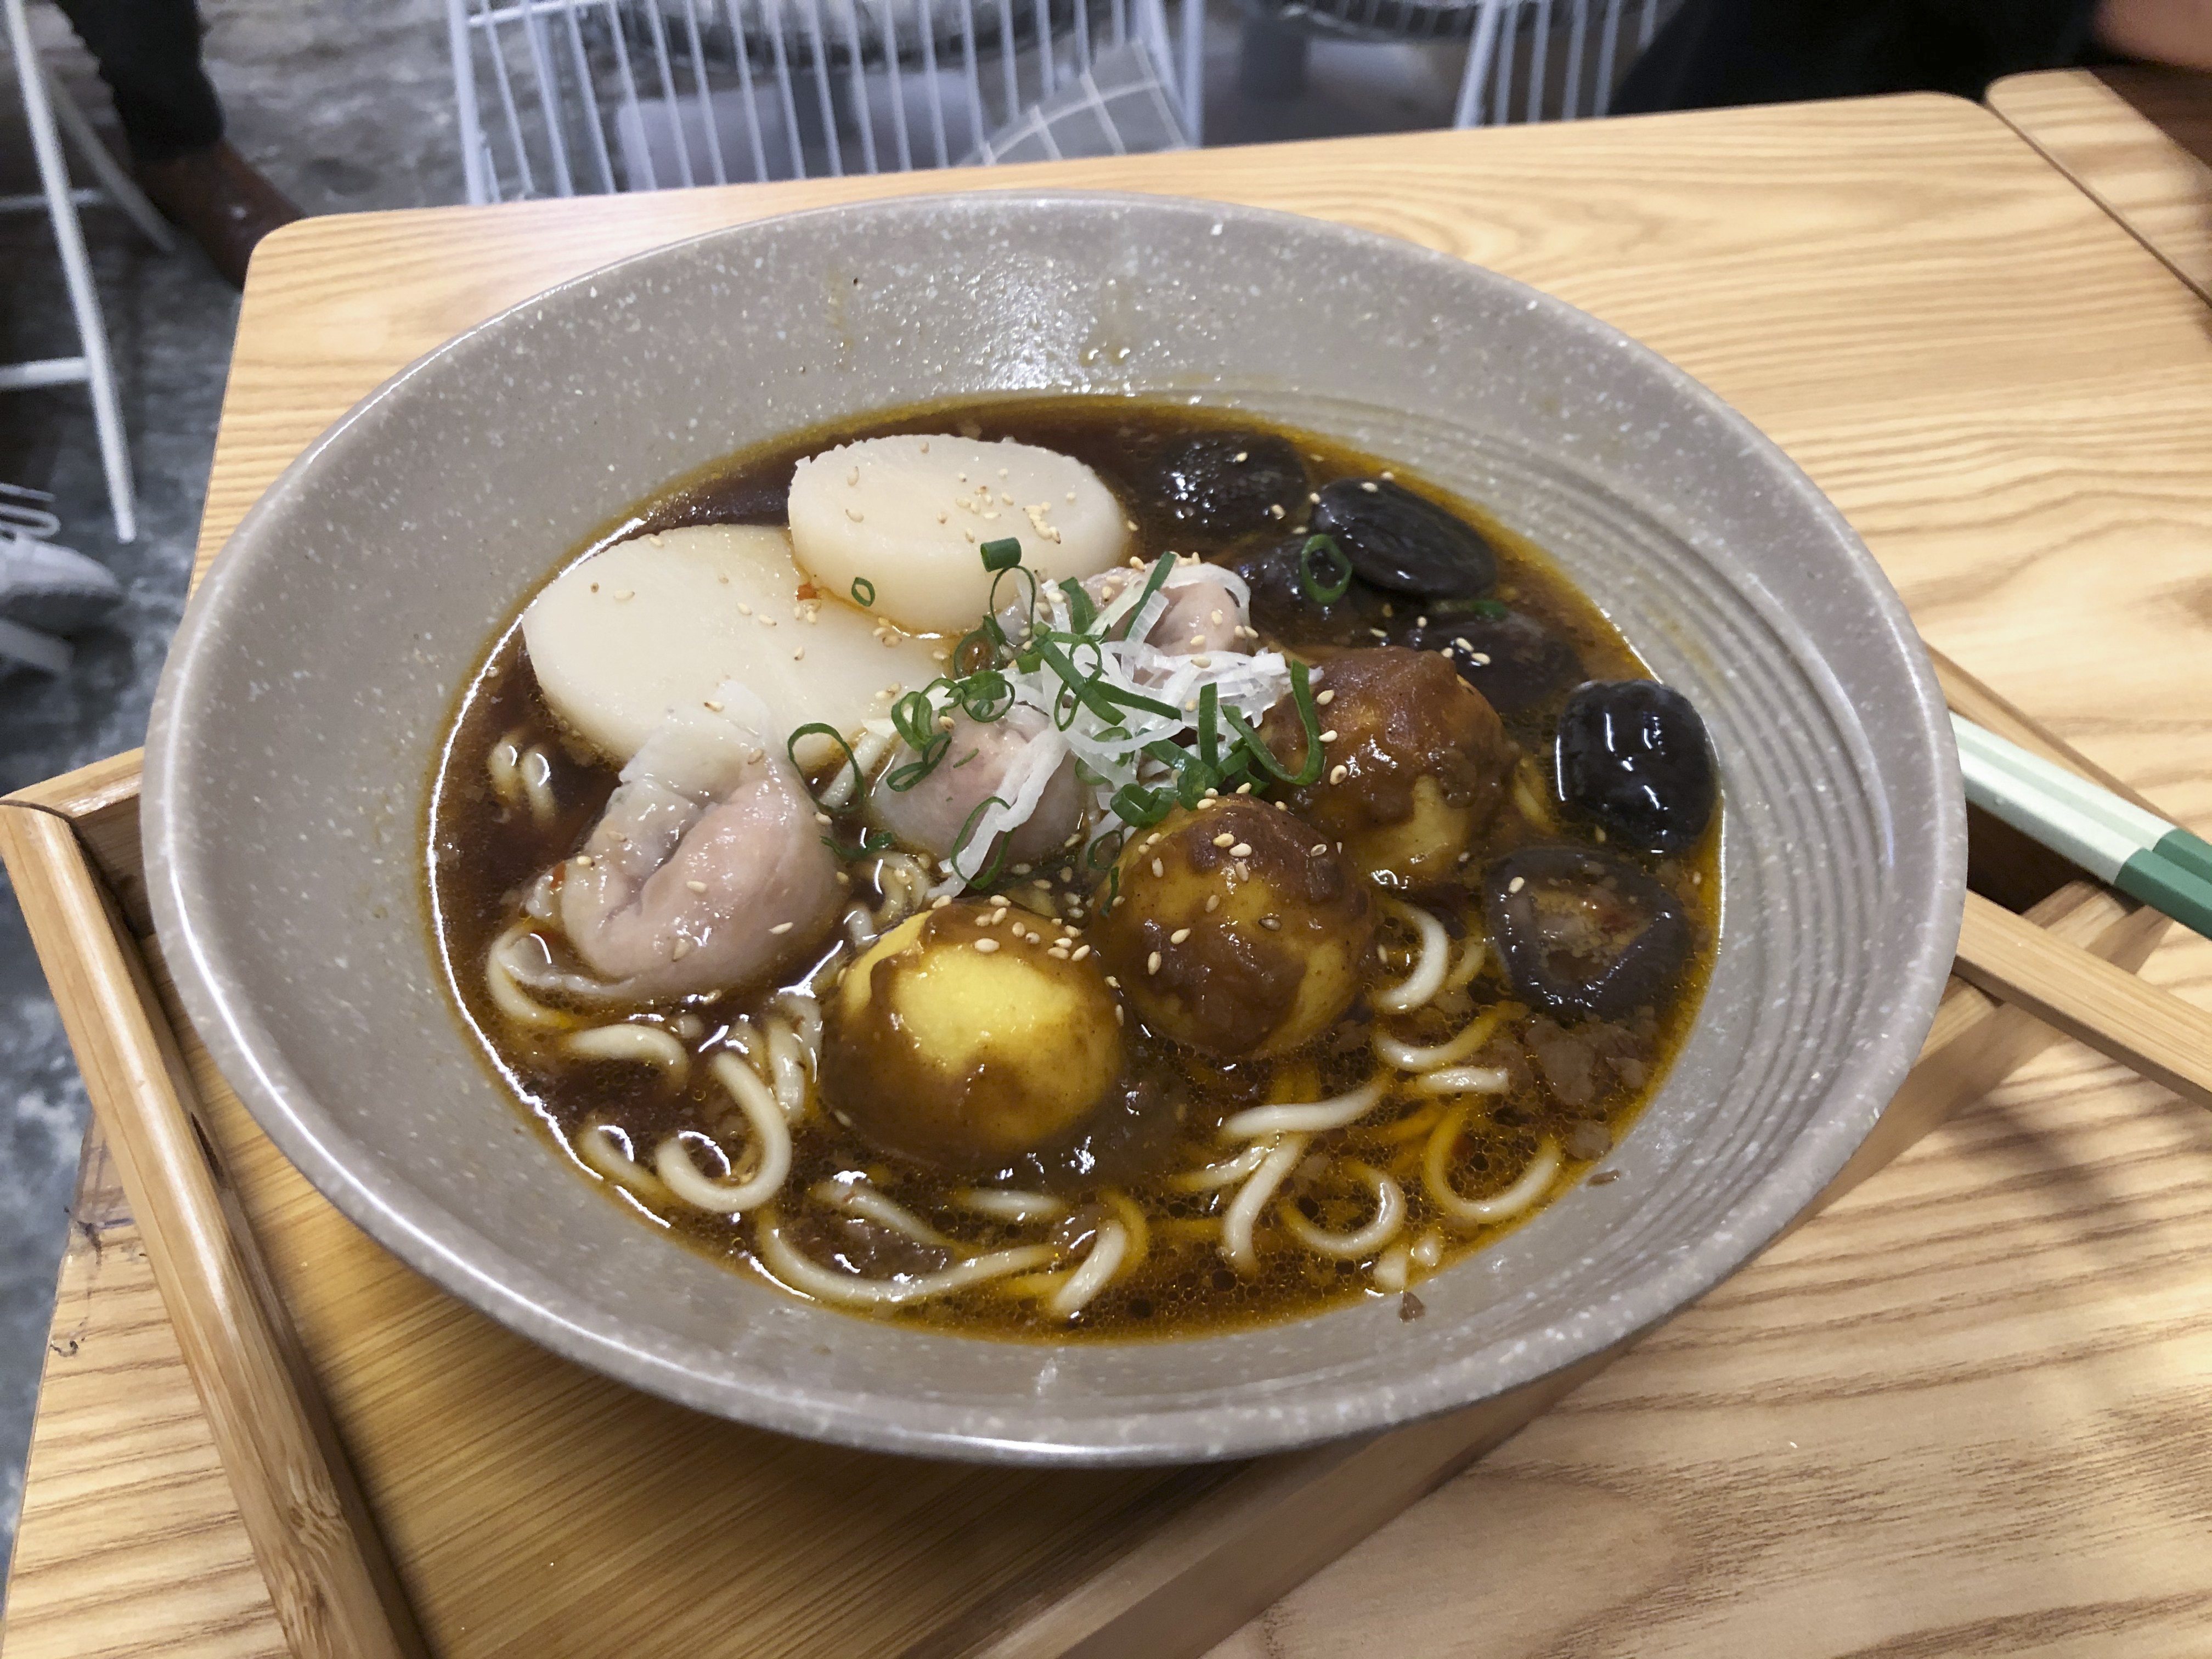 Cart noodles in beef brisket soup with curry fish balls, fish skin dumplings, mushrooms and turnips at Red Pocket Cart Noodles Cafe, Wan Chai, Hong Kong. Photo: Gigi Choy